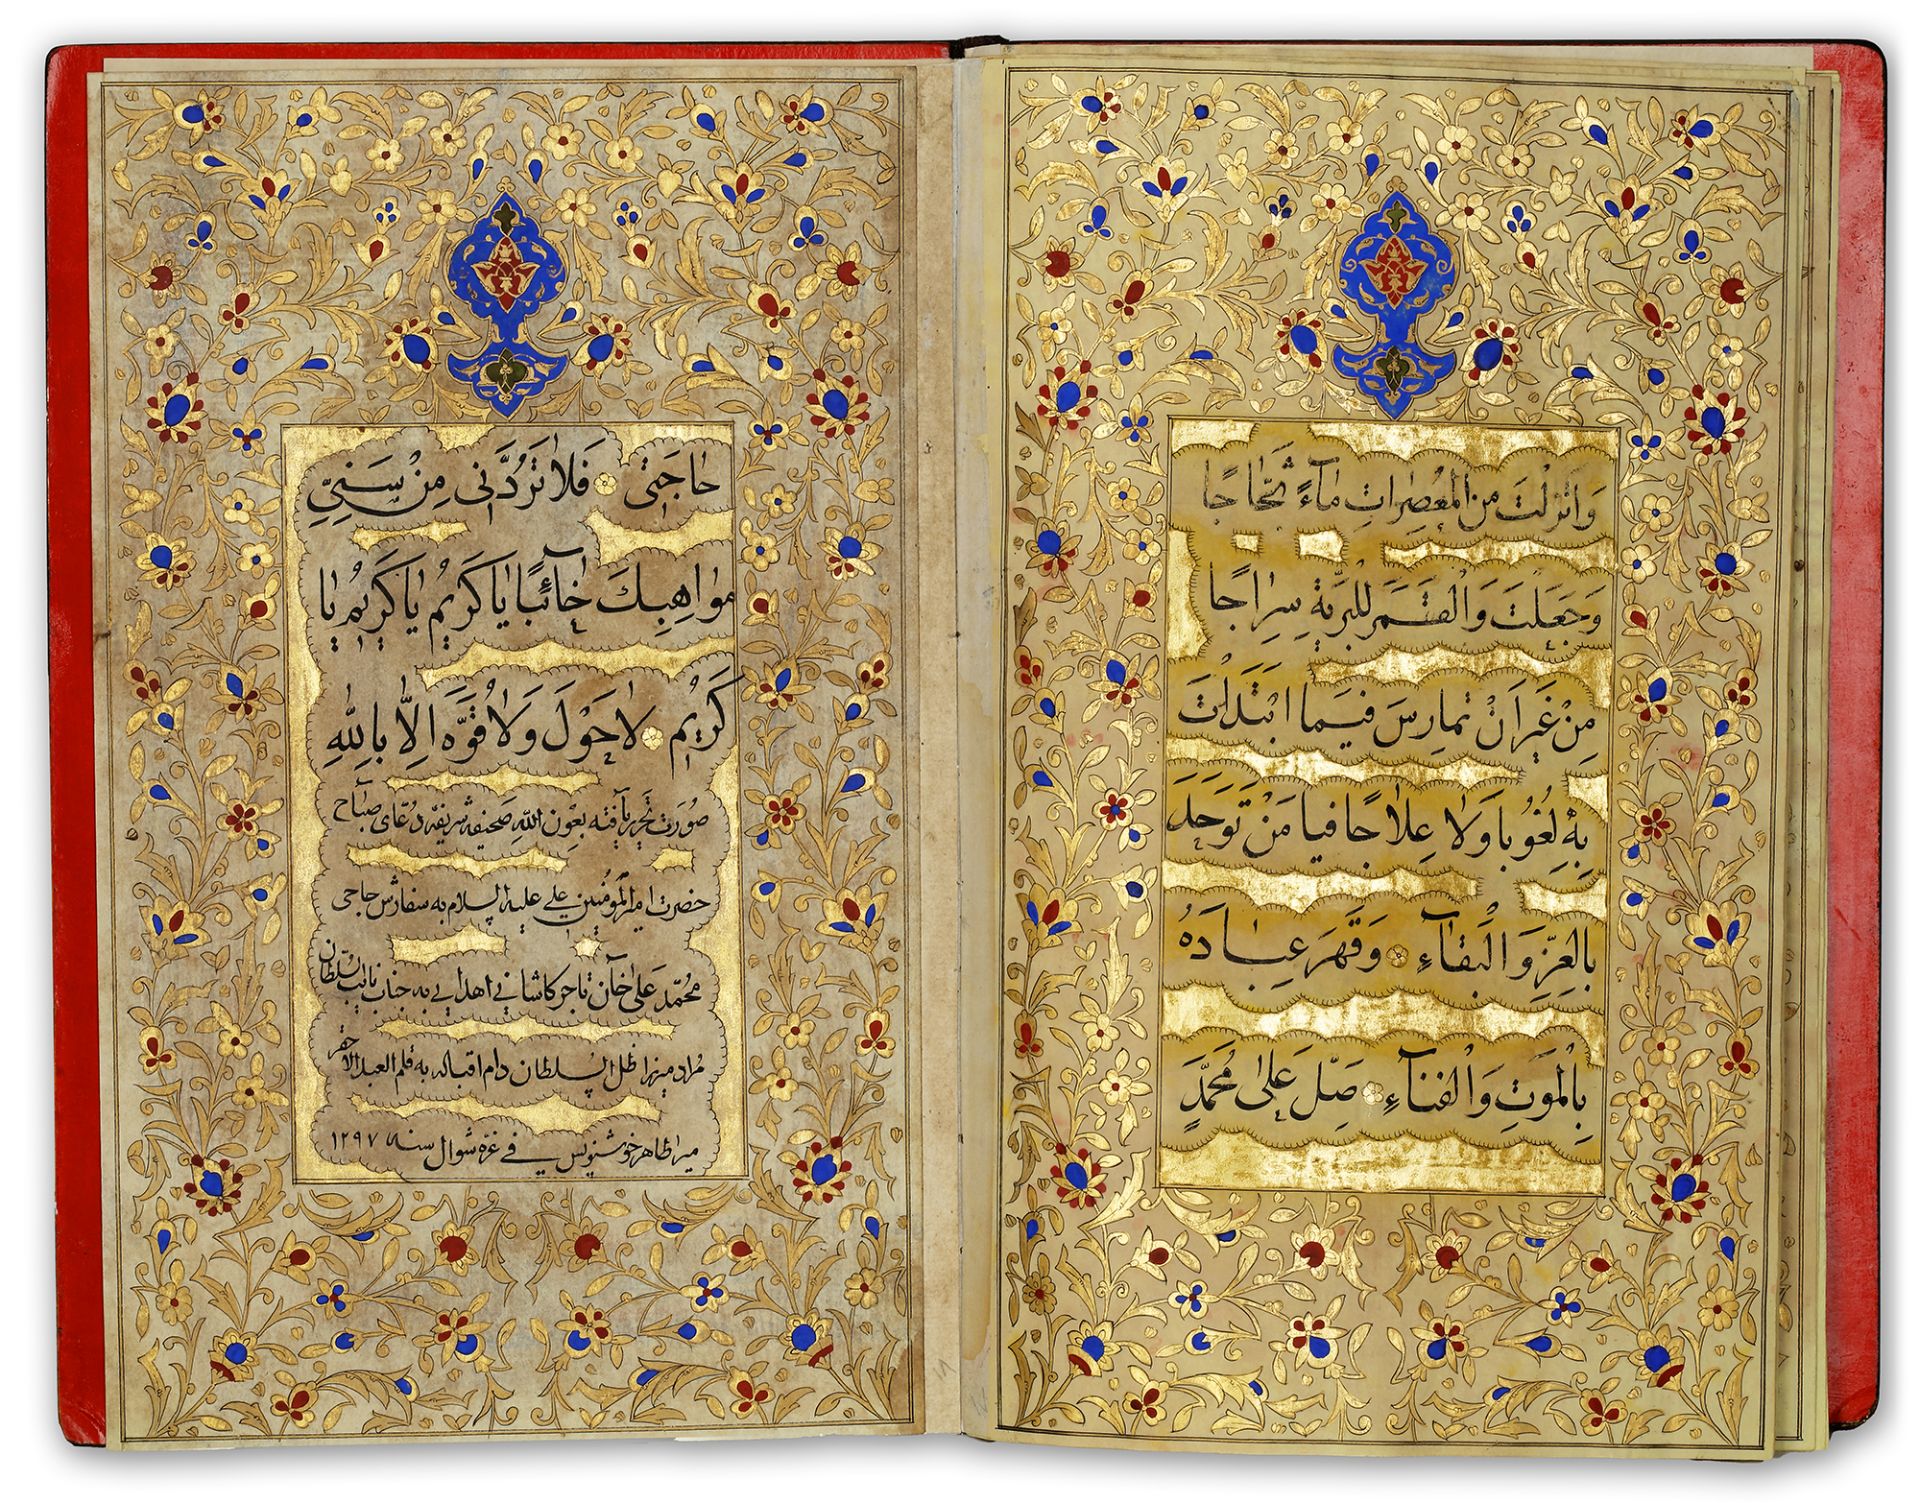 DU'A AL-SABAH, SIGNED AND DATED, MIR TAHIR, BEGINNING OF SHAWWAL 1297 AH/1880 AD - Image 8 of 10